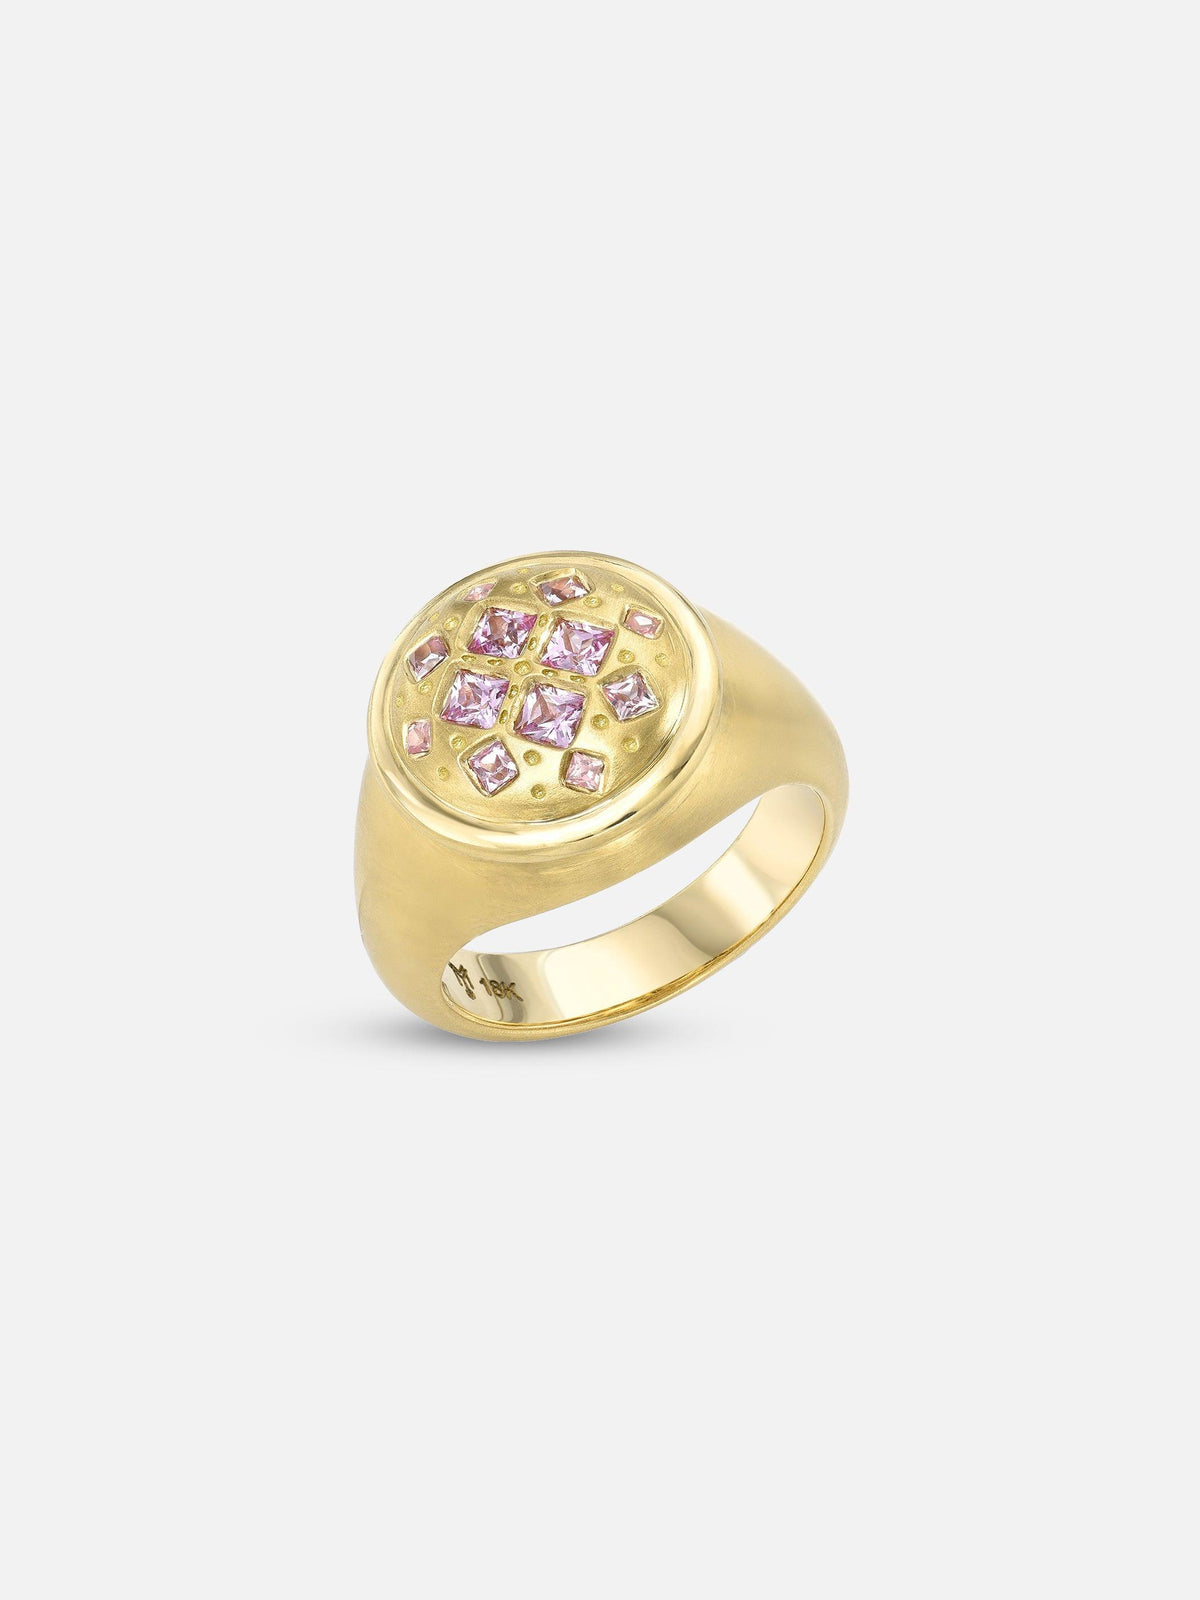 Sunset Sapphire Pinky Ring - Meredith Young - At Present